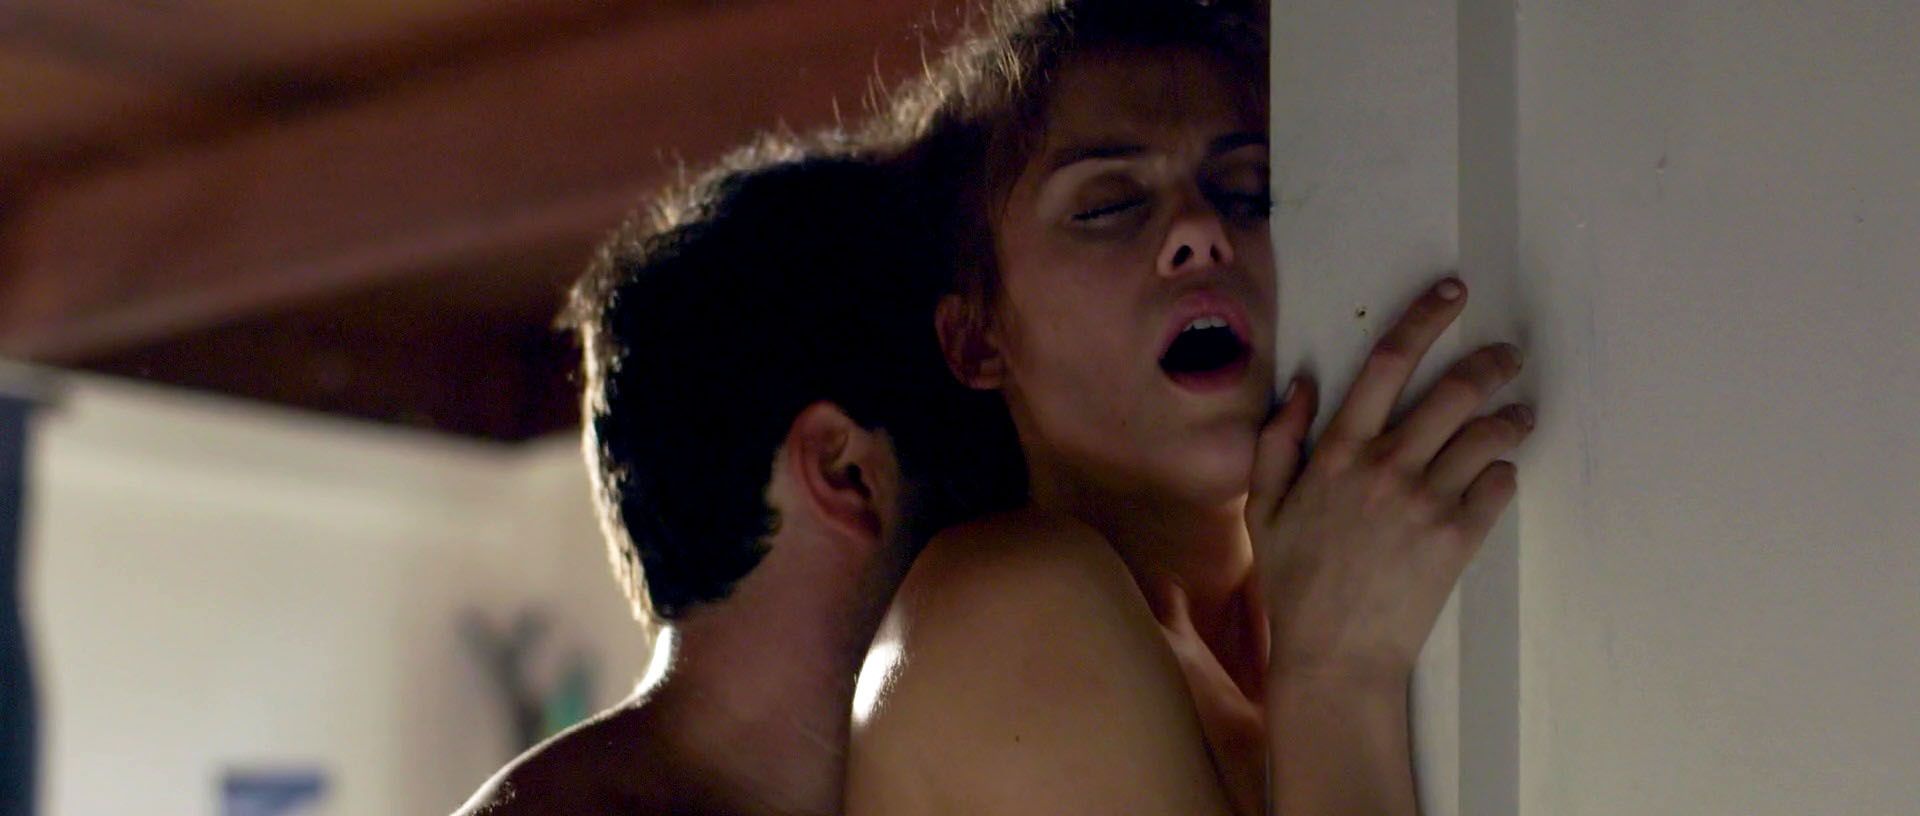 Lindsey Shaw Lying on Bed in Lingerie – Love Me (1:00) | NudeBase.com